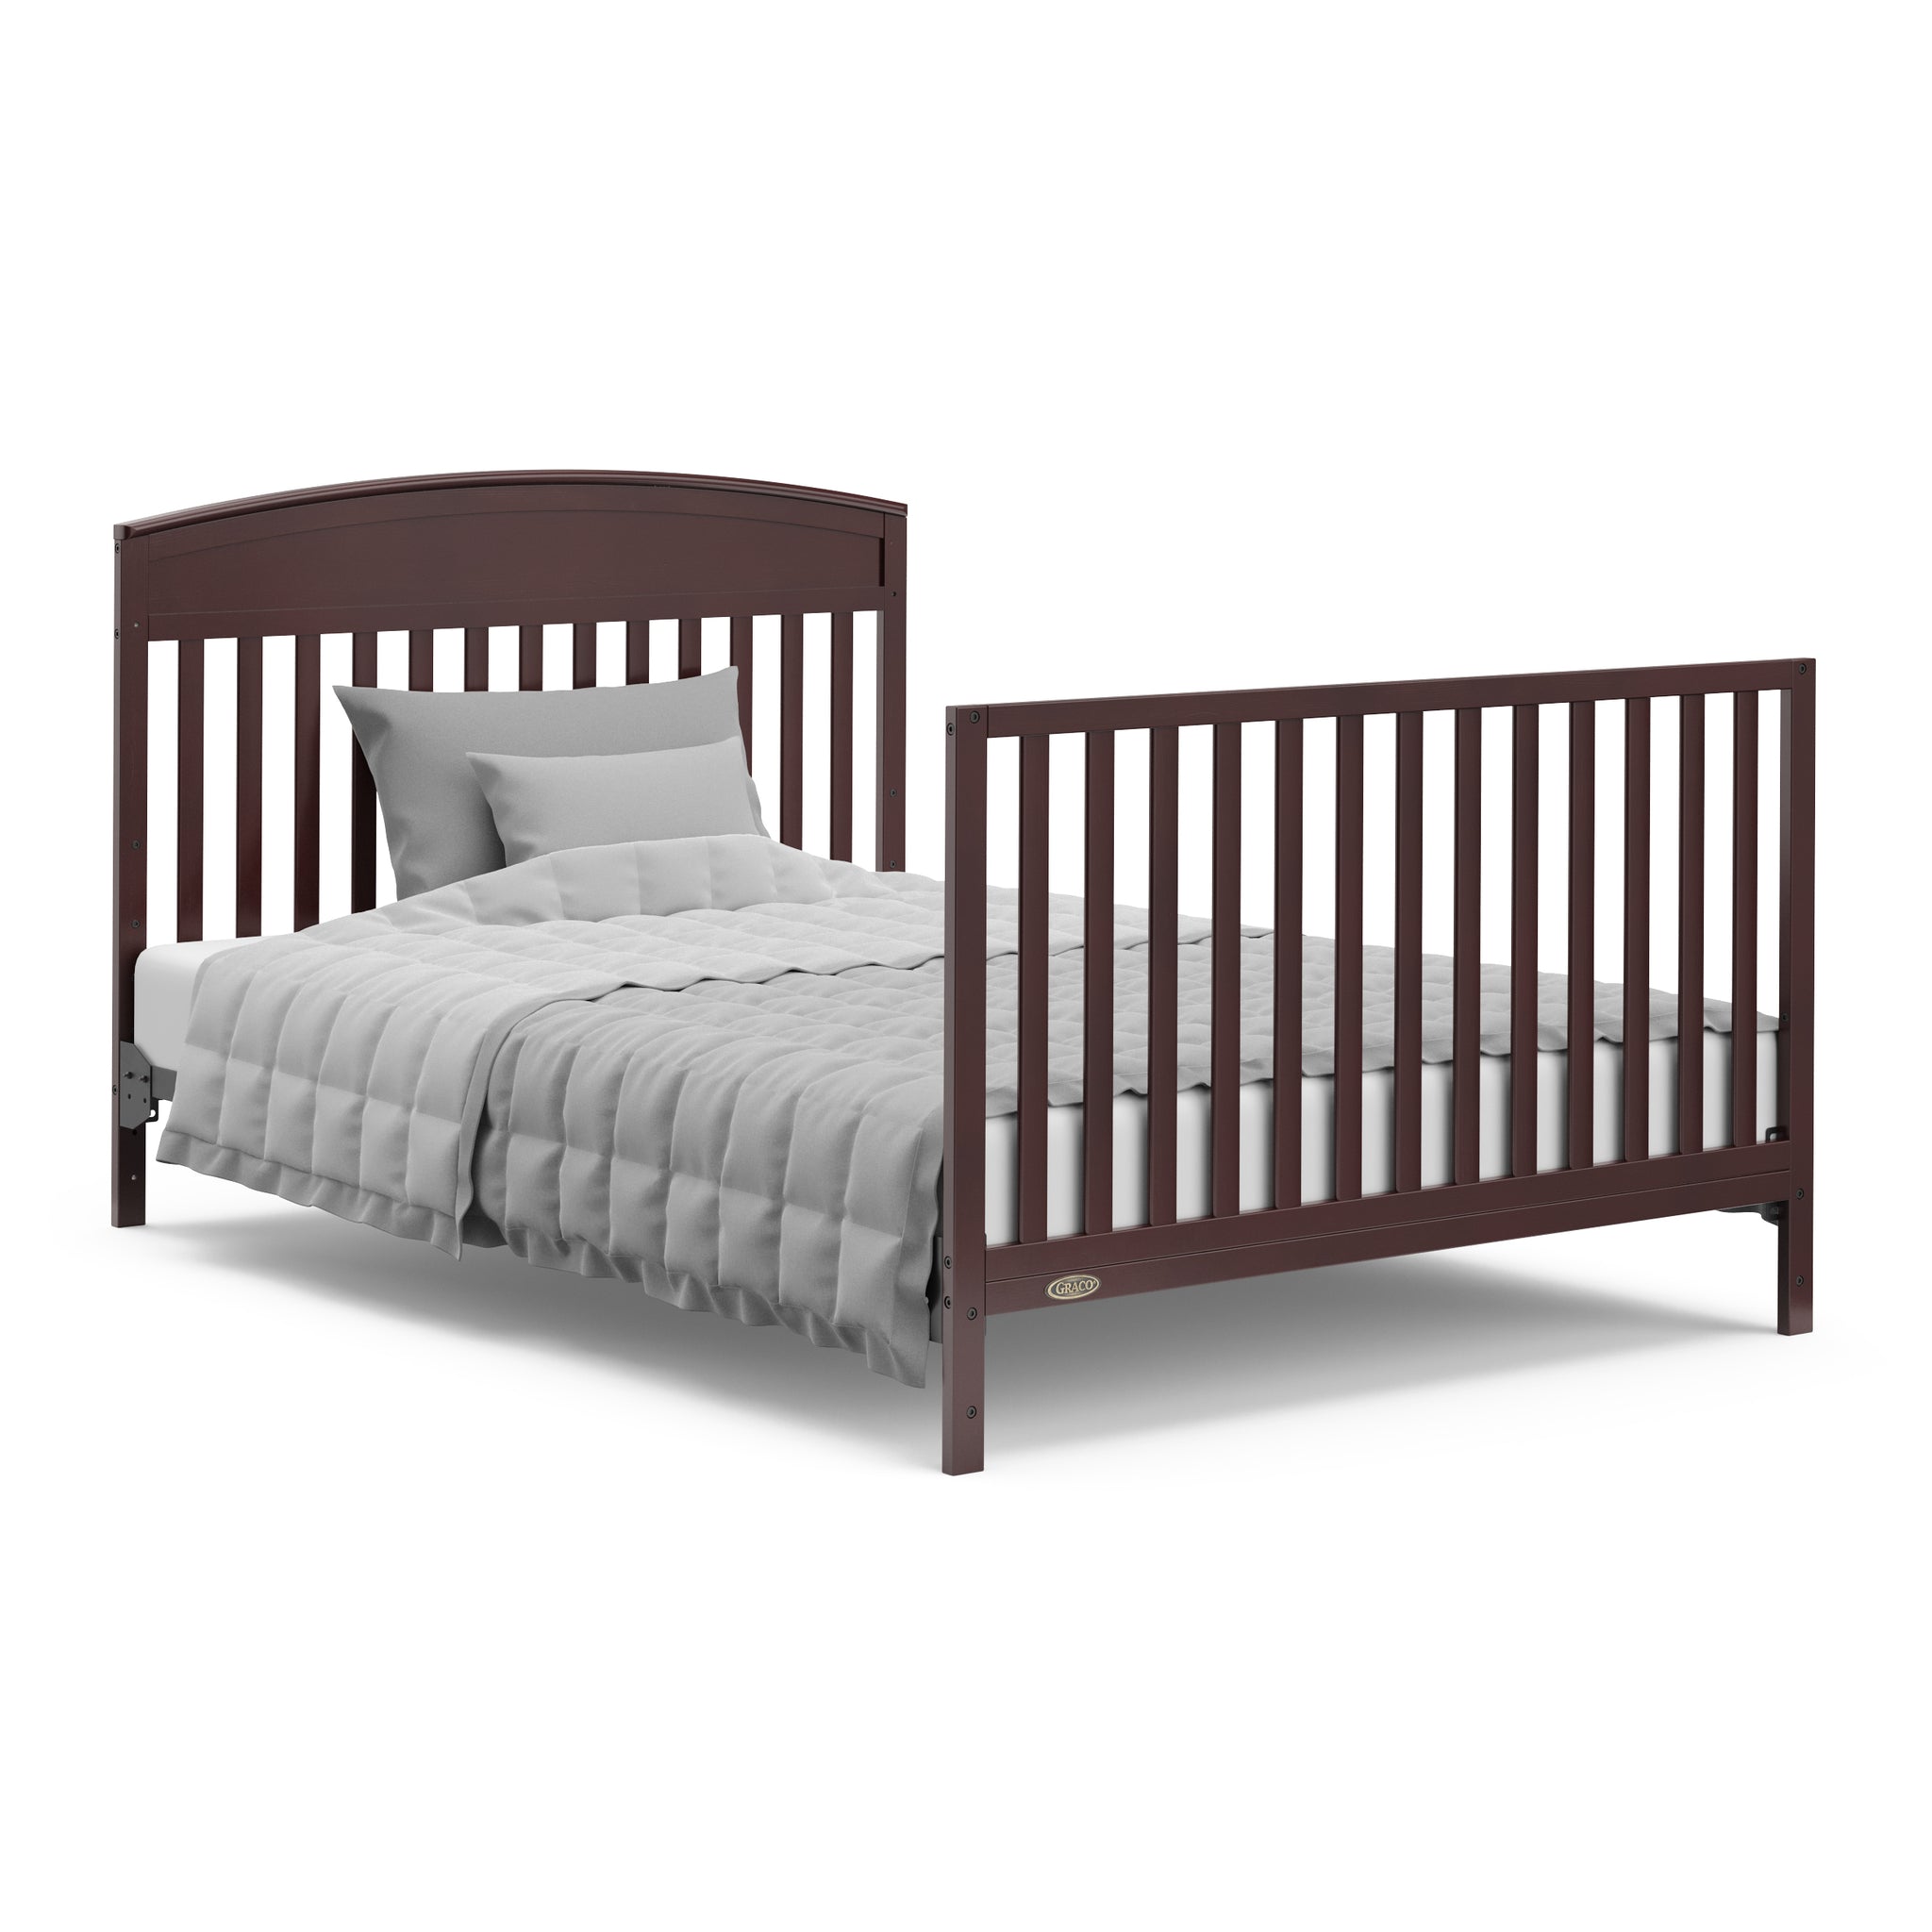 espresso crib with drawer in full-size bed with headboard and footboard conversion